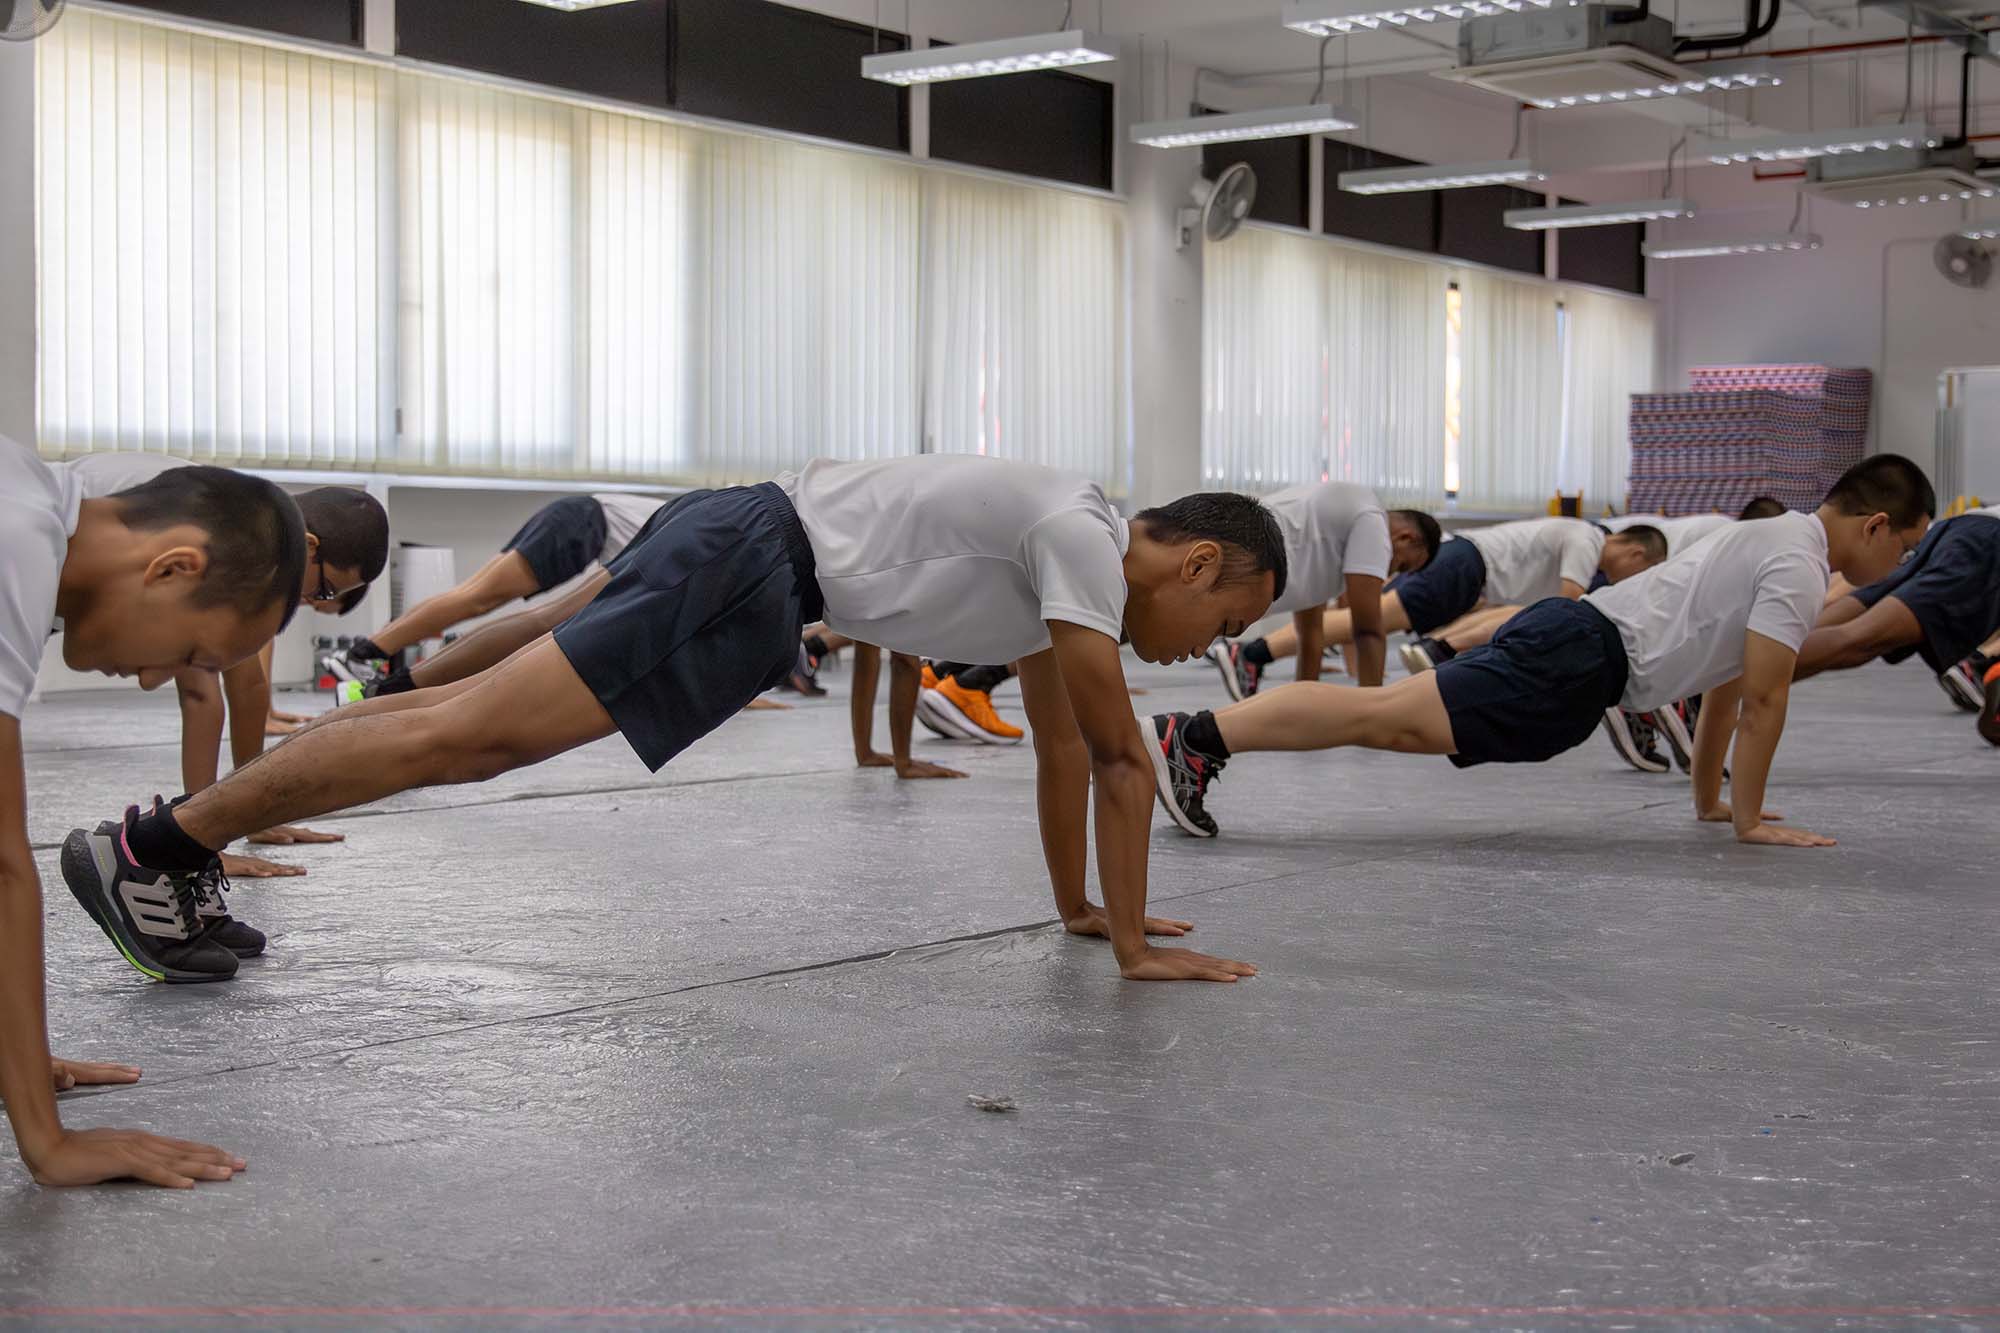 Physical fitness is an important attribute for TransCom officers. PHOTO: Alethea Lee